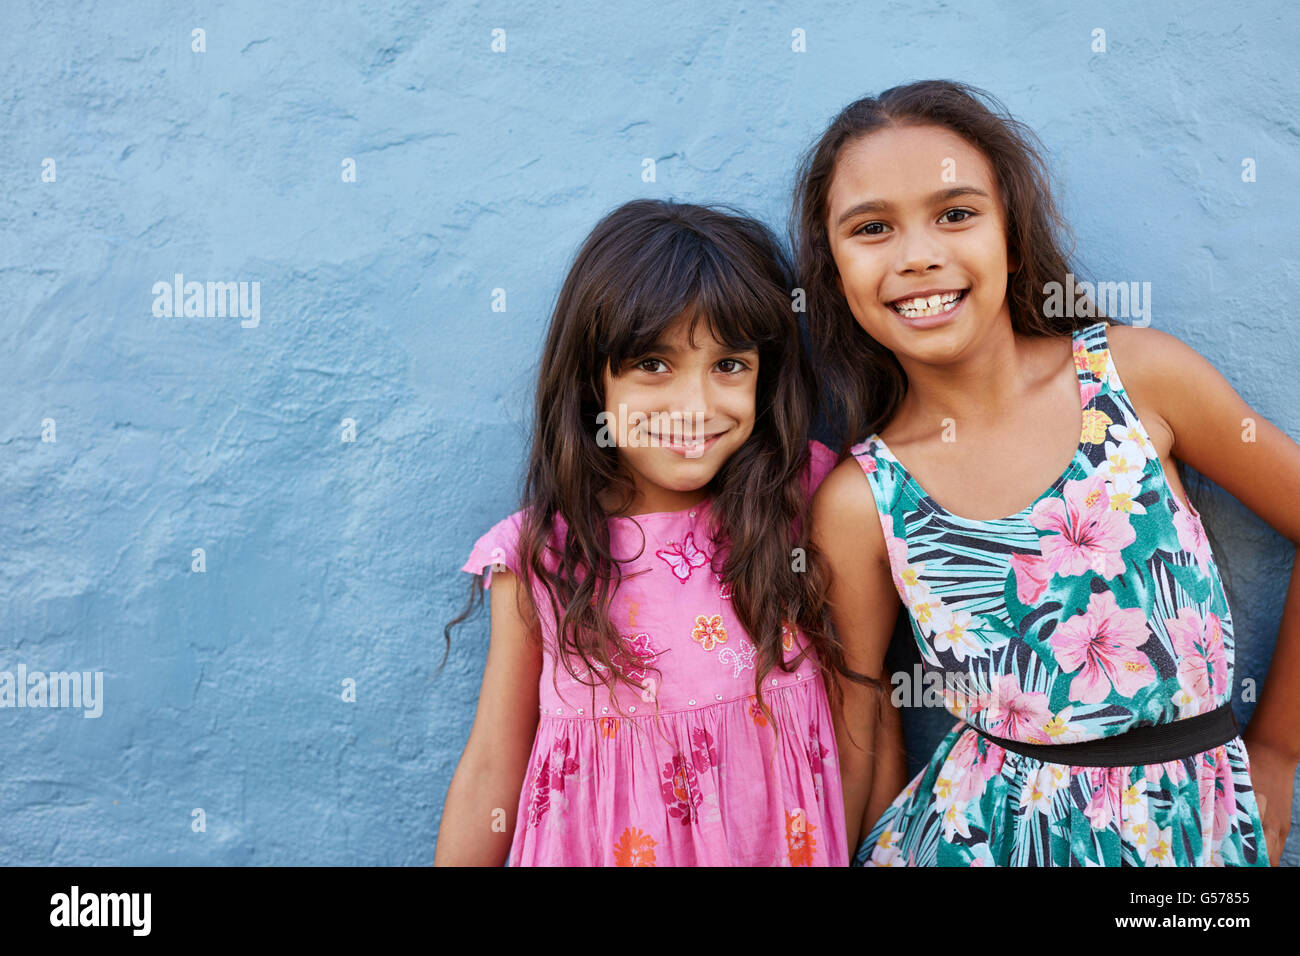 Portrait of two little girls standing together against blue background. Adorable little friends posing together with cute smile. Stock Photo